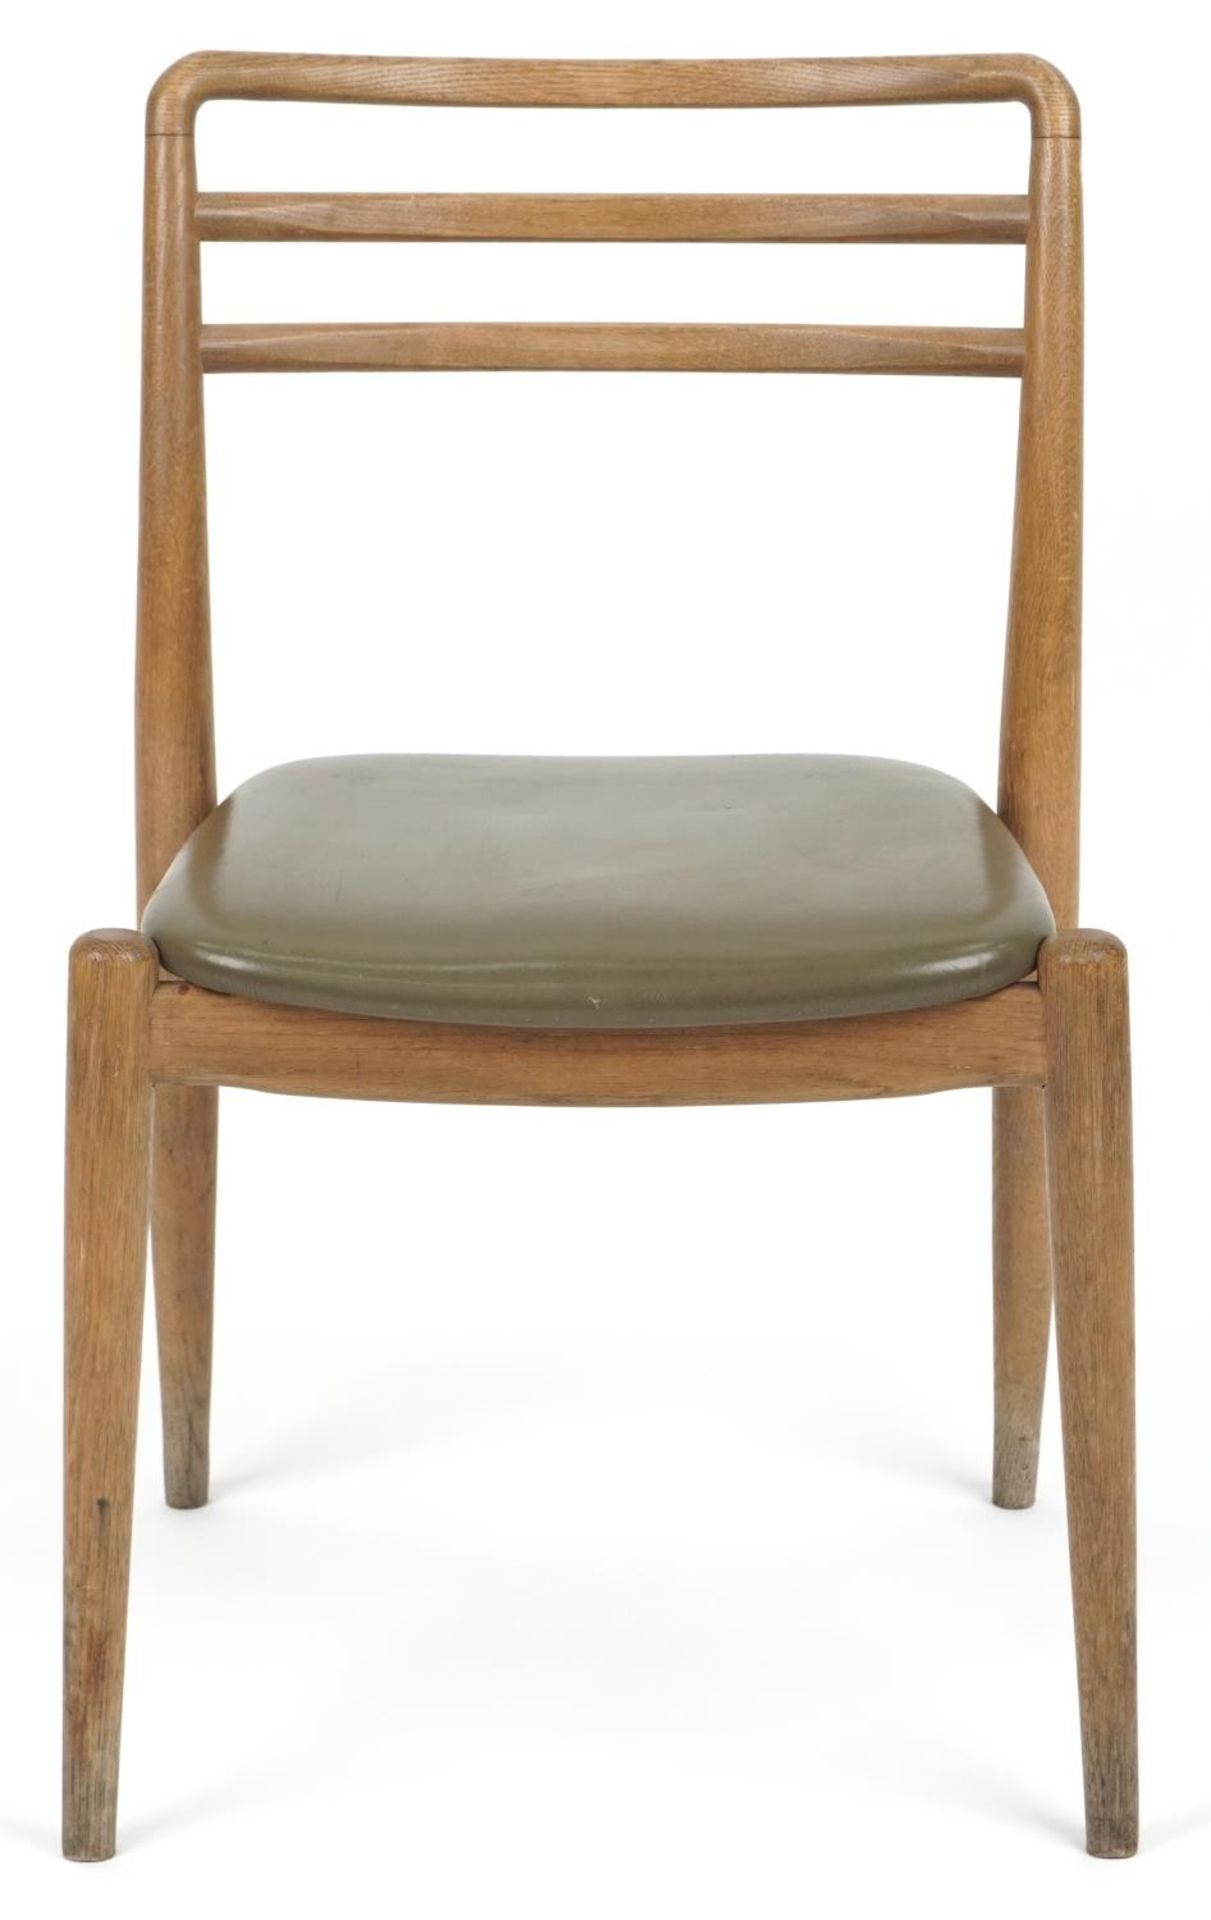 Scandinavian design teak chair with leather upholstered seat, 75cm high - Image 2 of 4